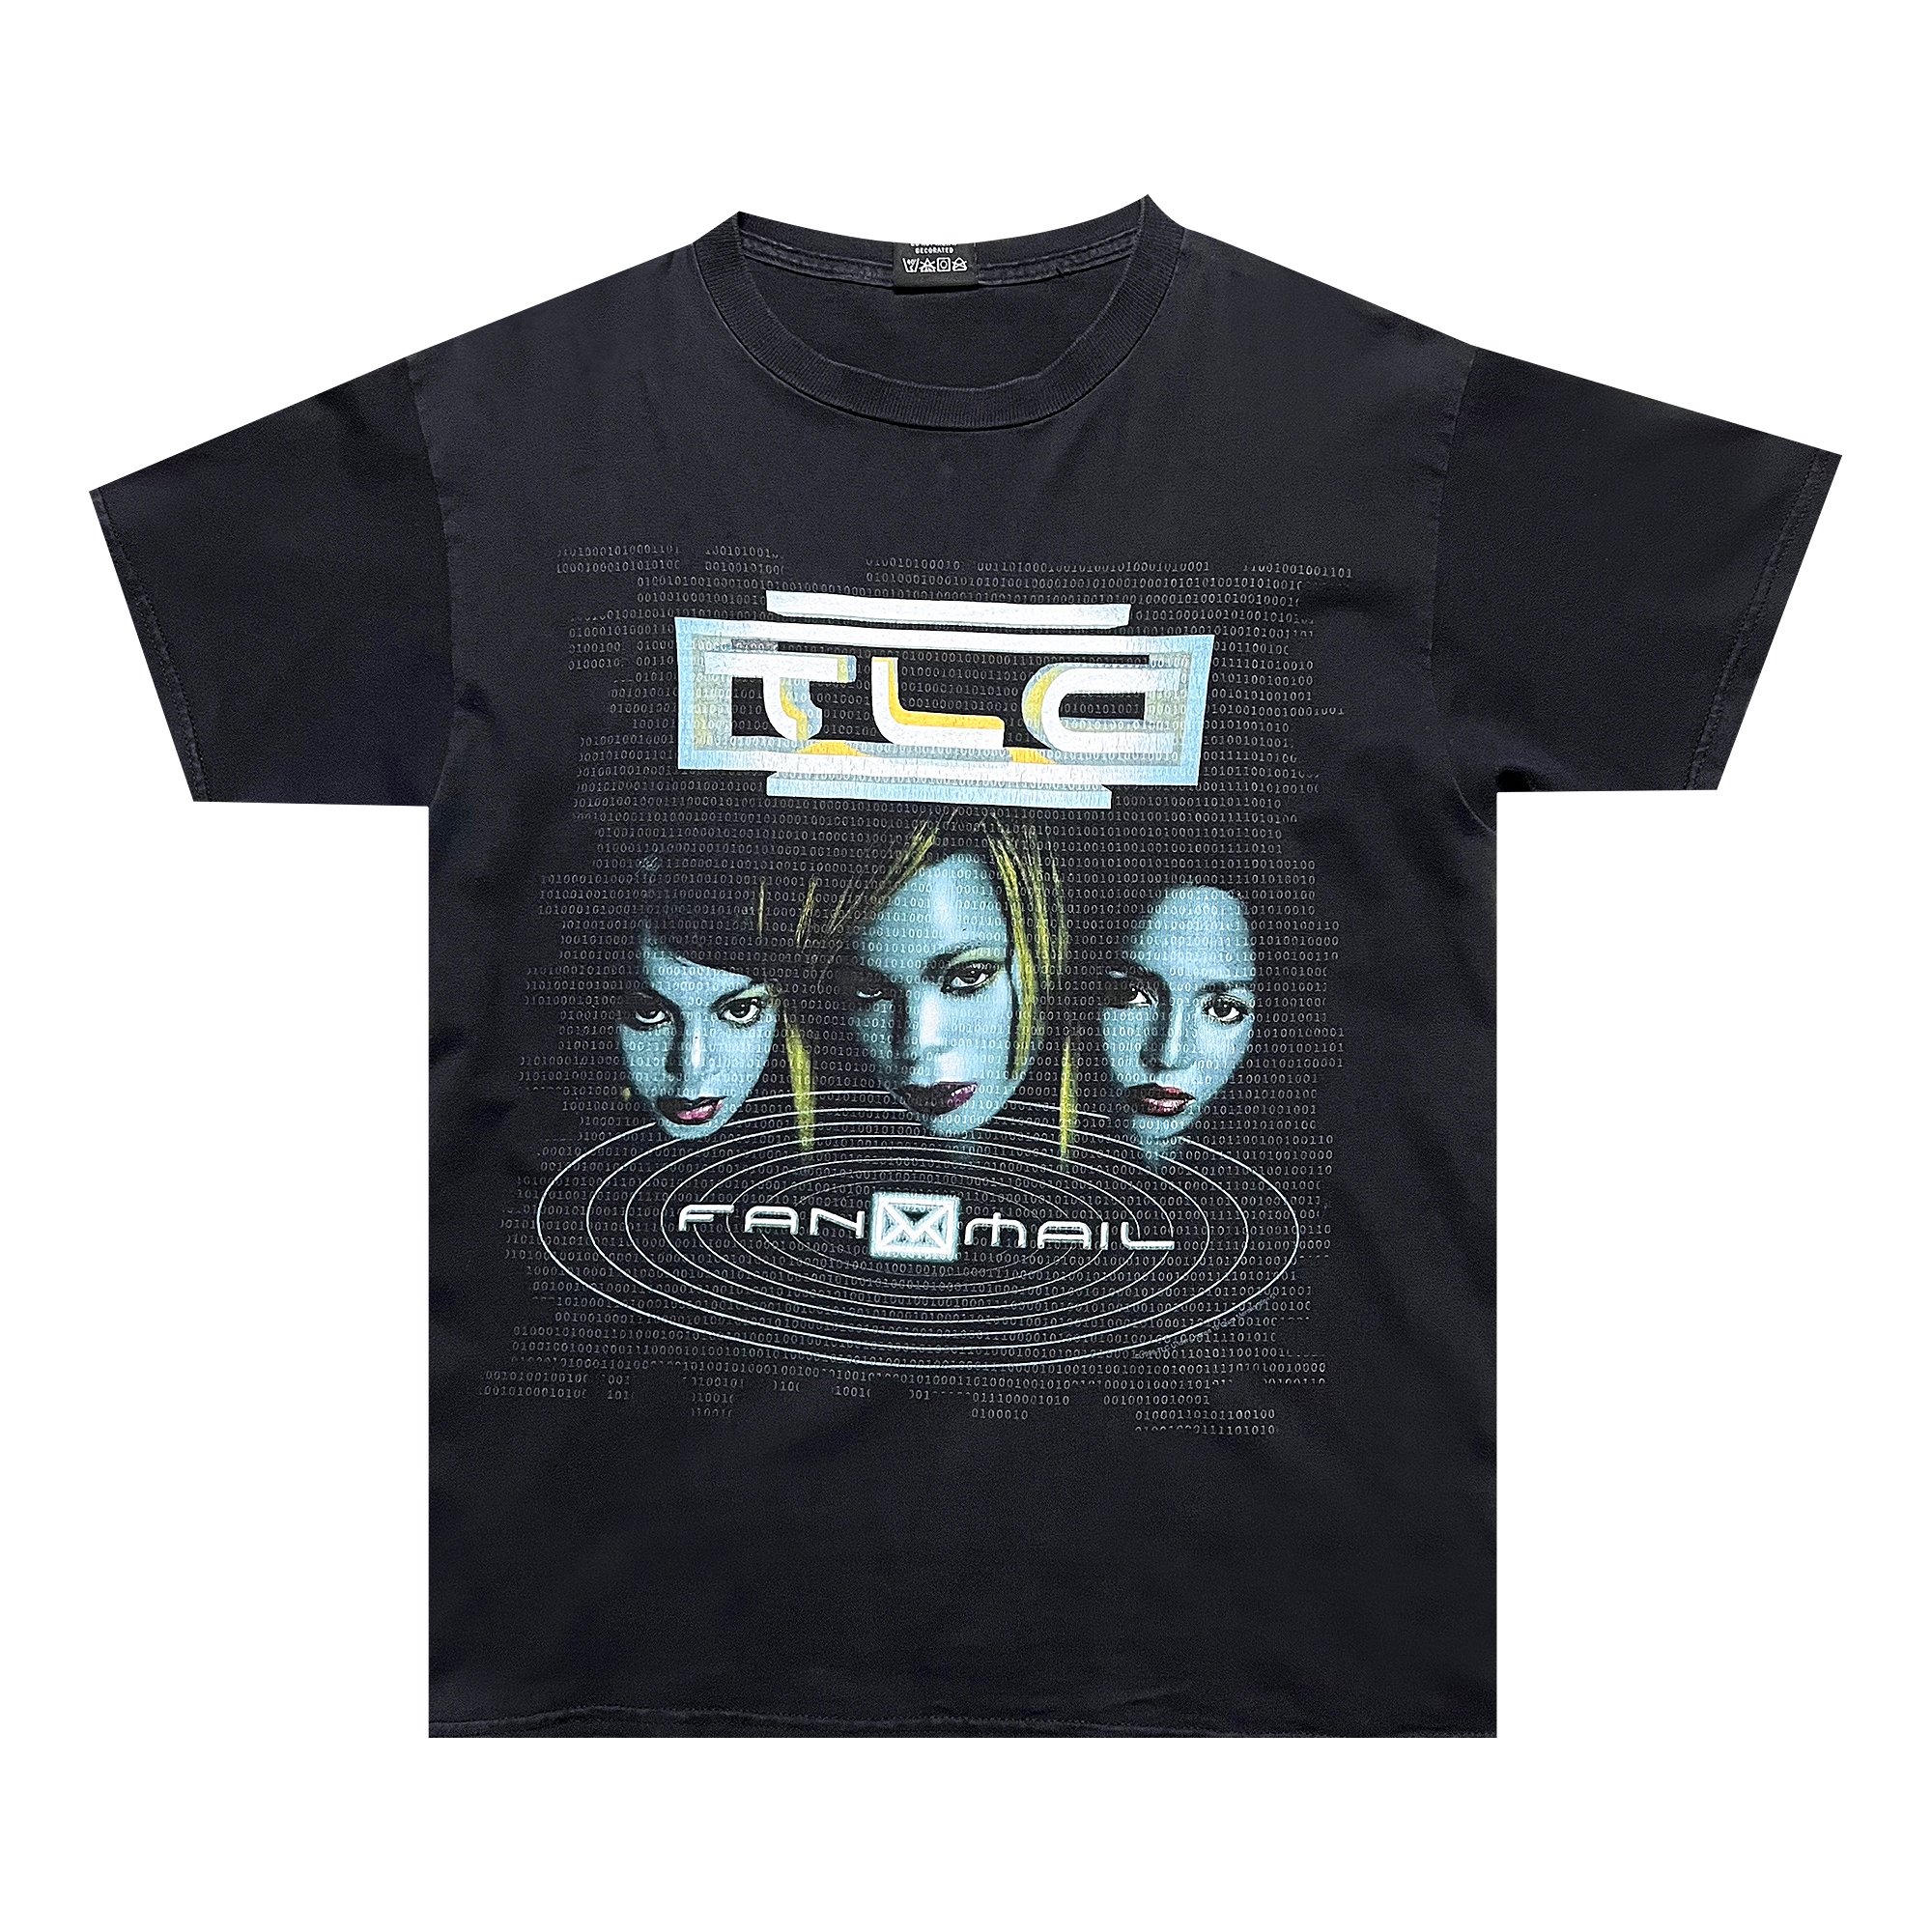 Buy Vintage TLC Fanmail World Tour Tee 'Faded Black' - 2903 